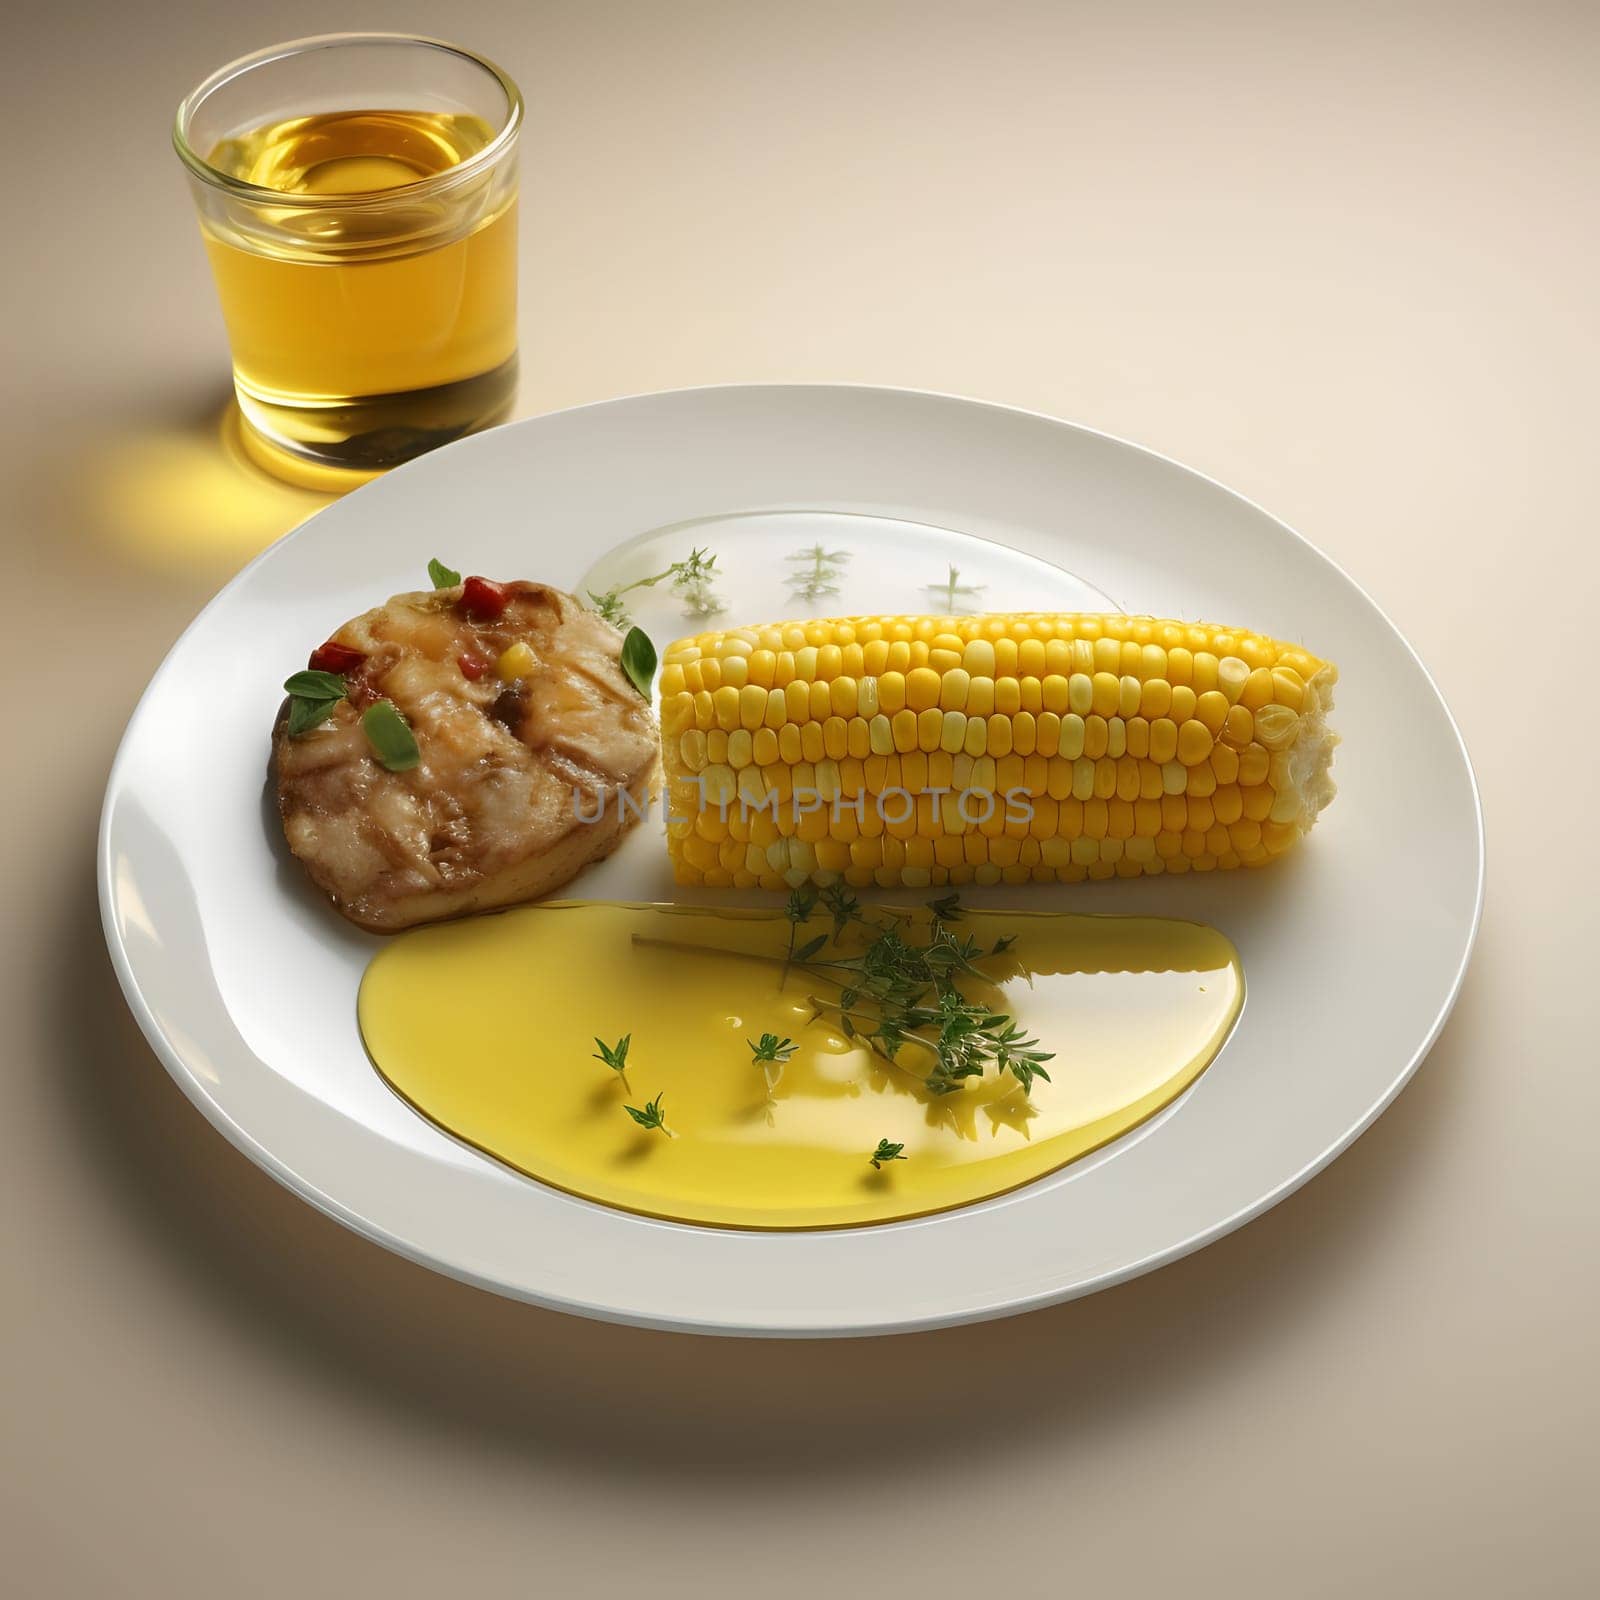 A white plate, and on it a cob of corn, oil, a piece of meat and orange juice in a glass. Corn as a dish of thanksgiving for the harvest. An atmosphere of joy and celebration.